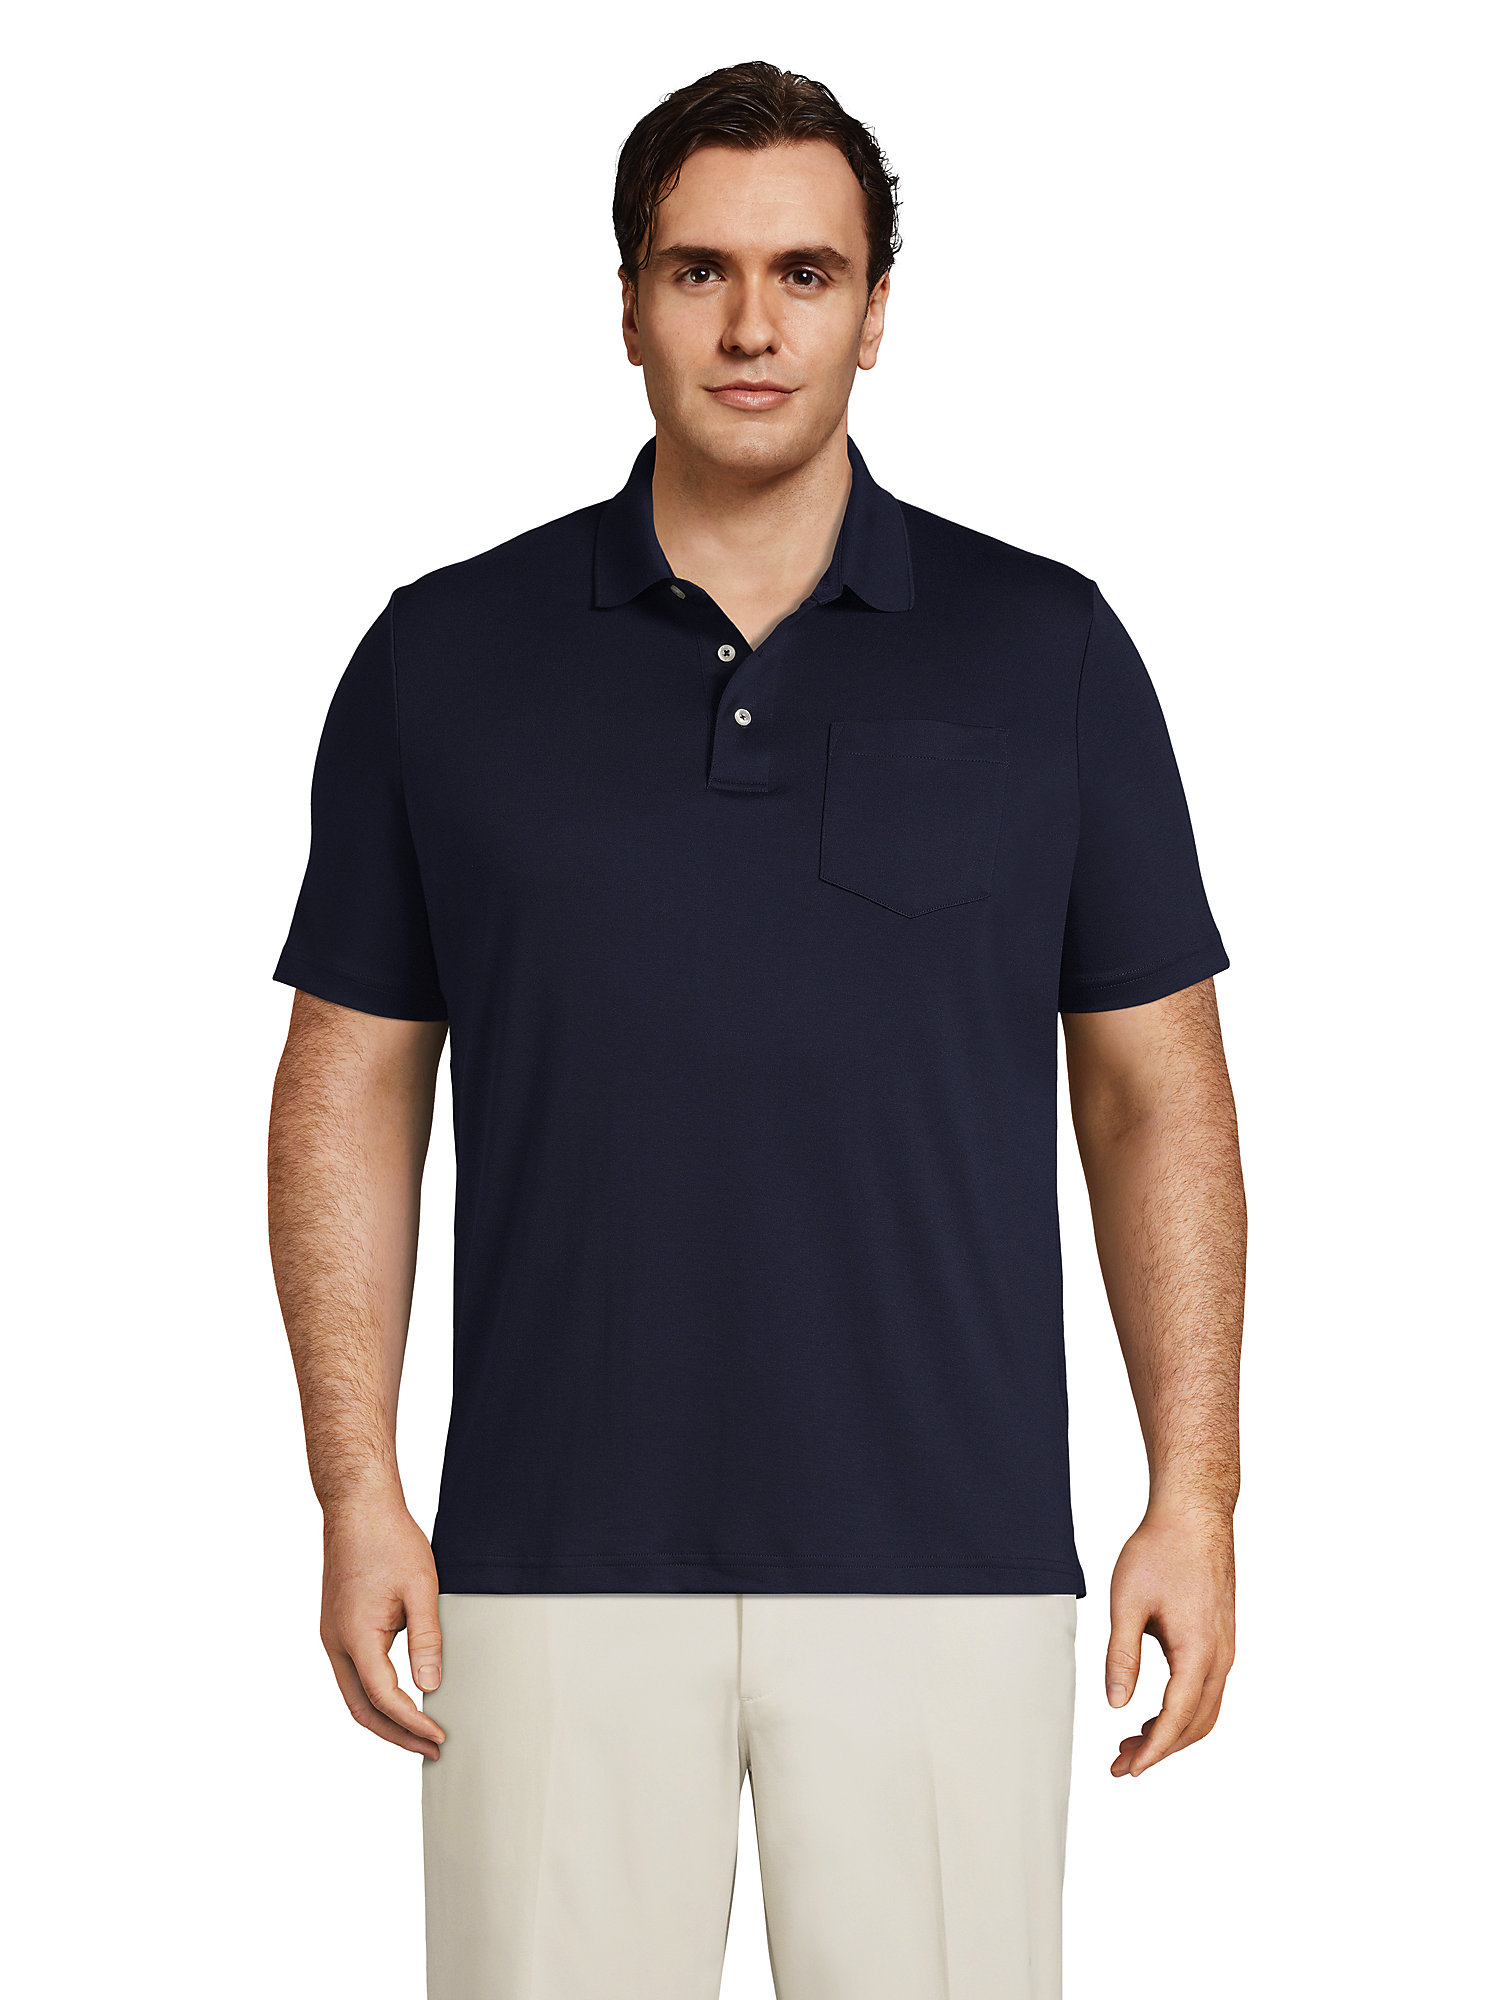 Lands' End Men's Big and Tall Short Sleeve Super Soft Supima Polo Shirt  with Pocket